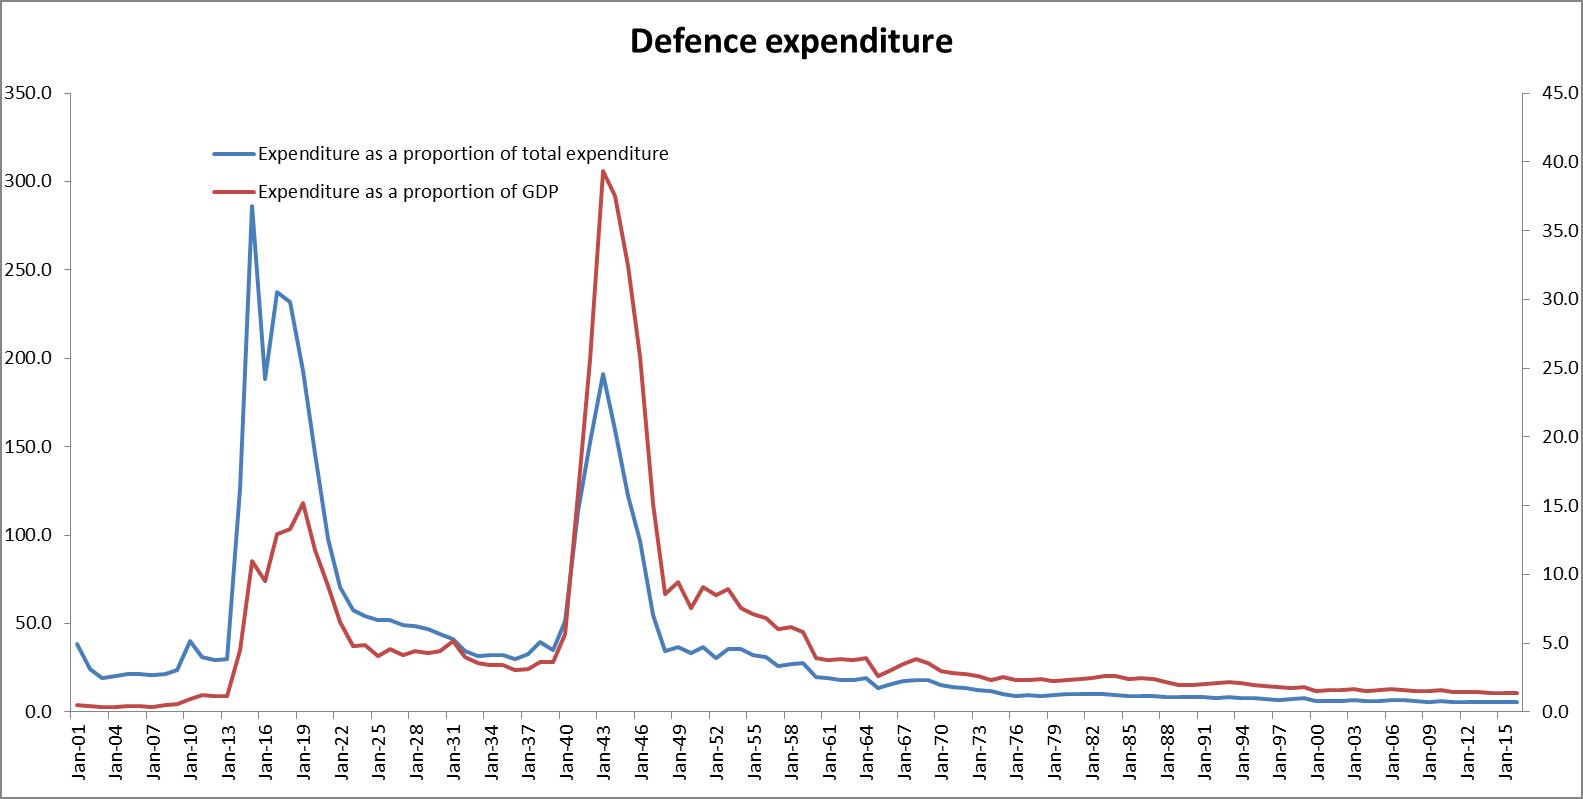 Graph 1: Defence expenditure as a proportion of GDP and total expenditure